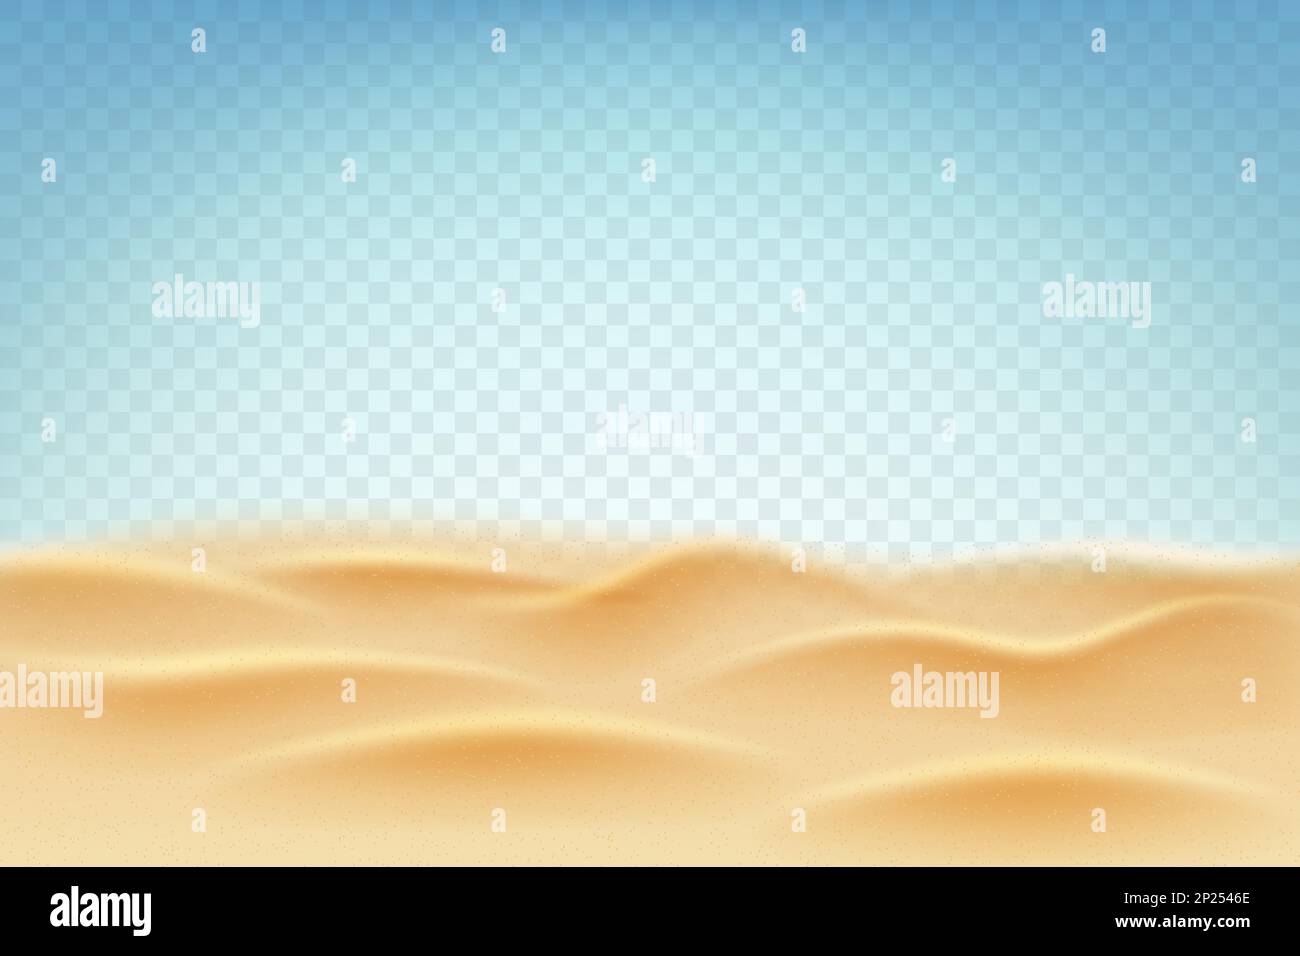 Realistic sand. Playa beach. Stones and sandy dunes. Tropical desert background. 3D sea coast. Ocean bottom. Colorful river waves. Dry nature panorama. Sahara scenery border. Vector realistic pattern Stock Vector